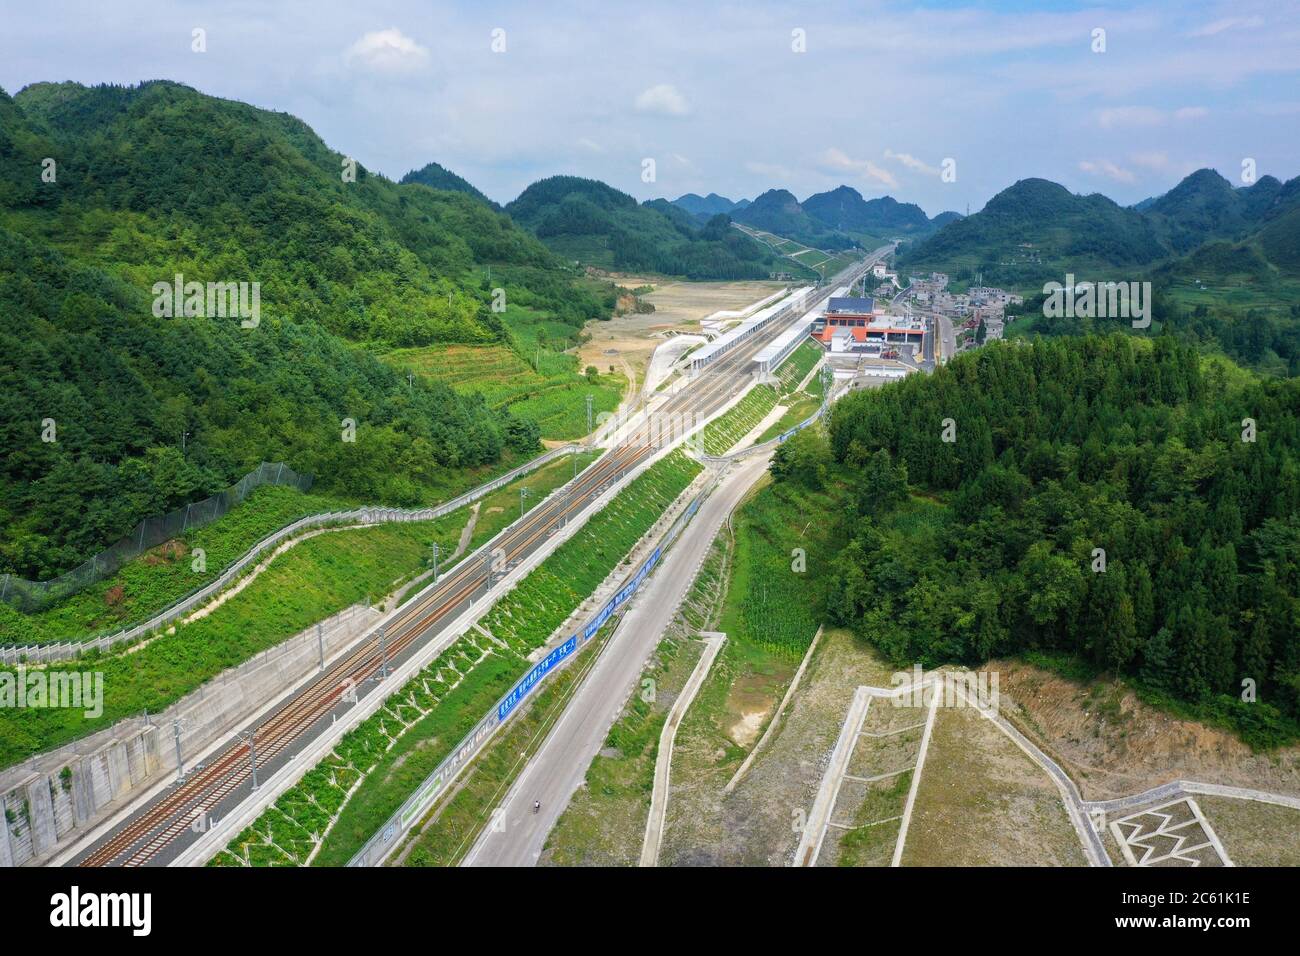 Liupanshui. 6th July, 2020. Aerial photo taken on July 6, 2020 shows the Anshun-Liupanshui railway in southwest China's Guizhou Province. The Anshun-Liupanshui intercity railway, with a designed speed of 250 km per hour, is being prepared for opening. The railway will shorten the travel time between Guiyang and Liupanshui from the current 3.5 hours to about 1 hour, and Liupanshui City will be fully connected with the national high-speed rail network. Credit: Liu Xu/Xinhua/Alamy Live News Stock Photo